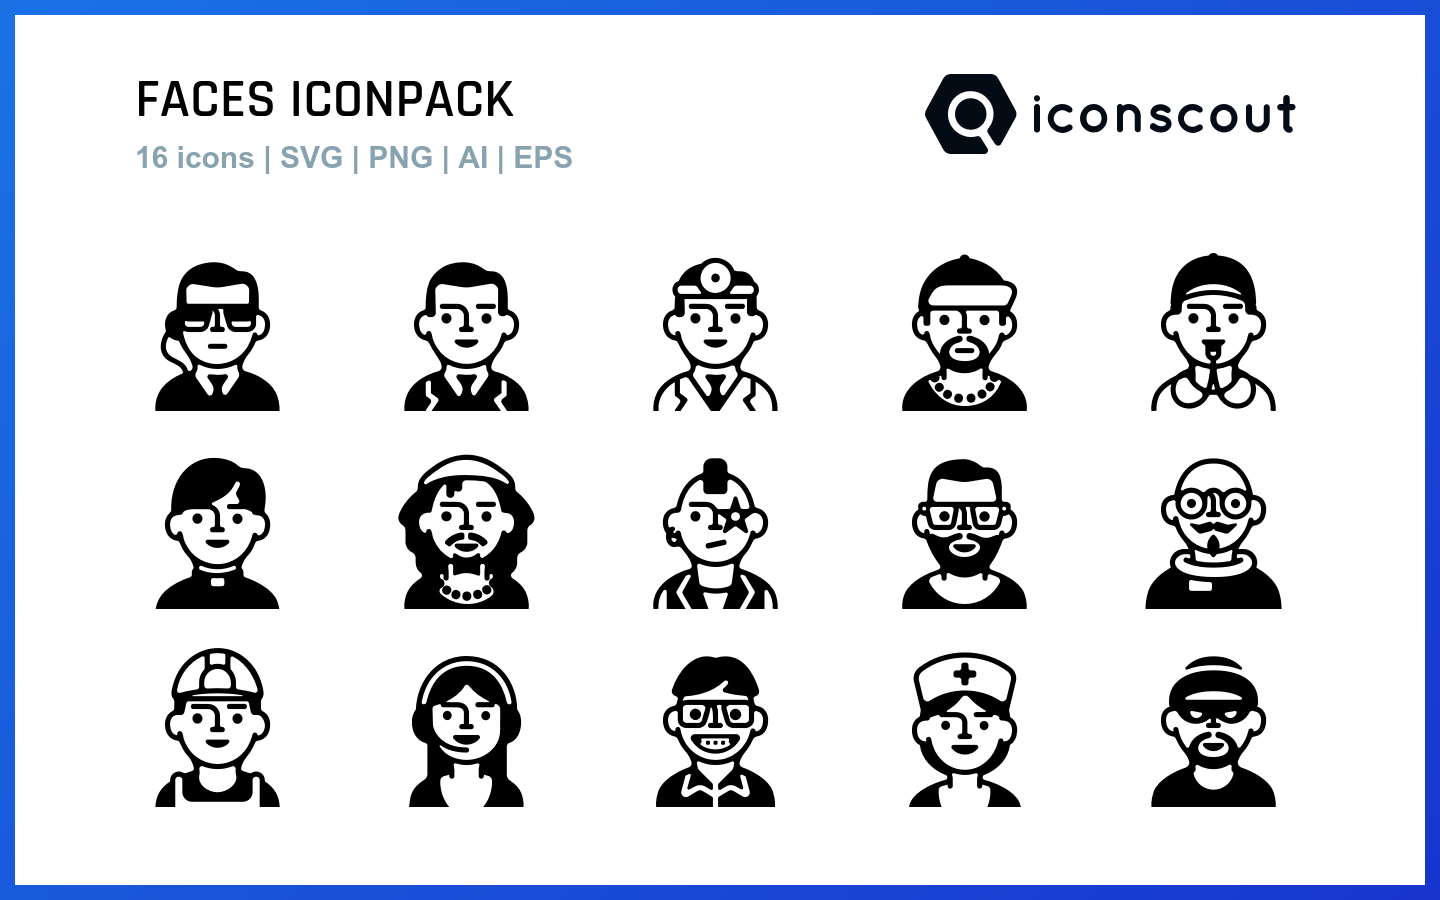 Faces icons by Guilherme Simoes